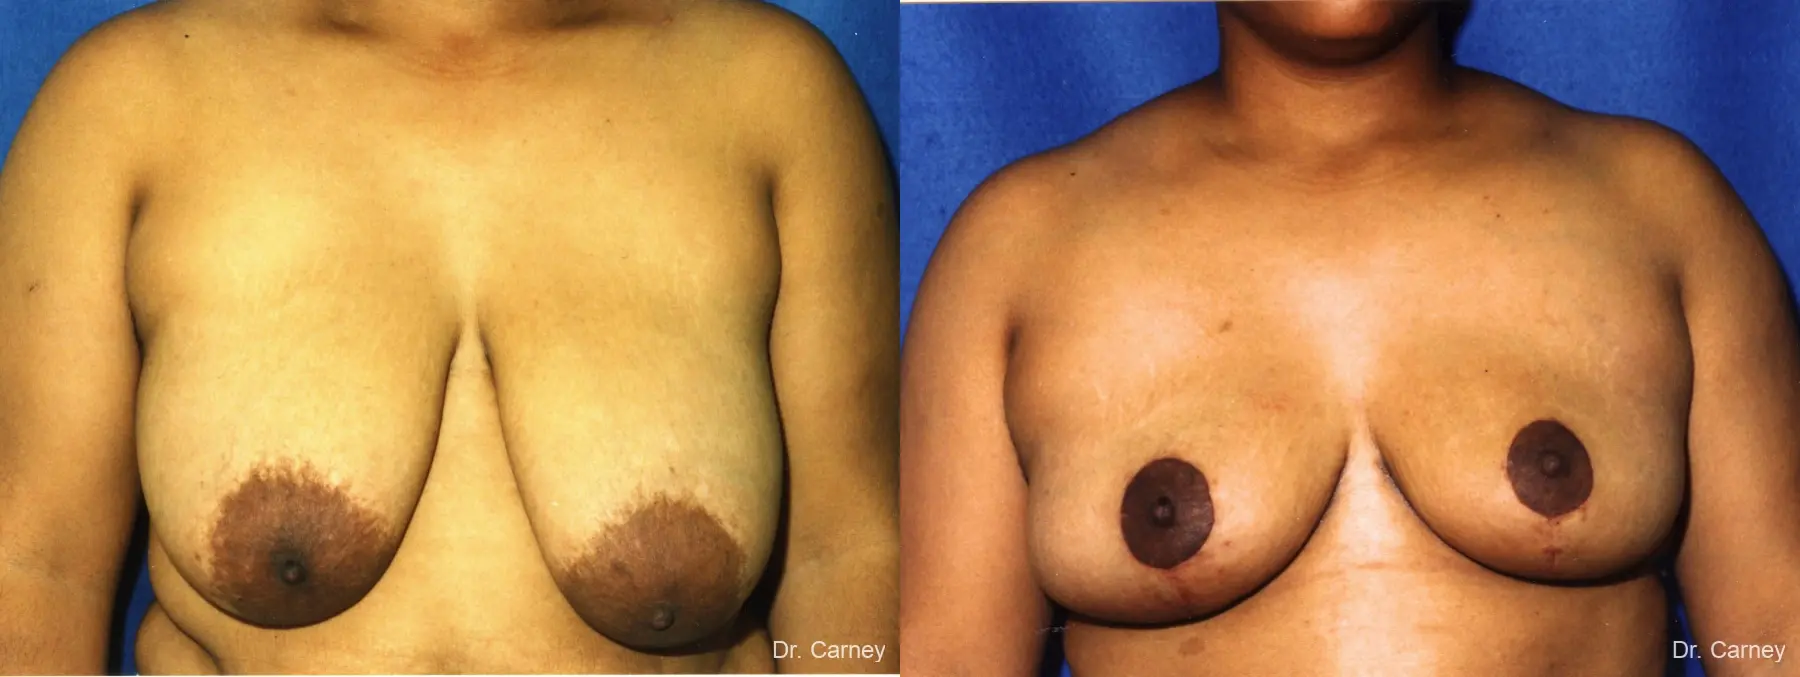 Virginia Beach Breast Reduction 1231 - Before and After